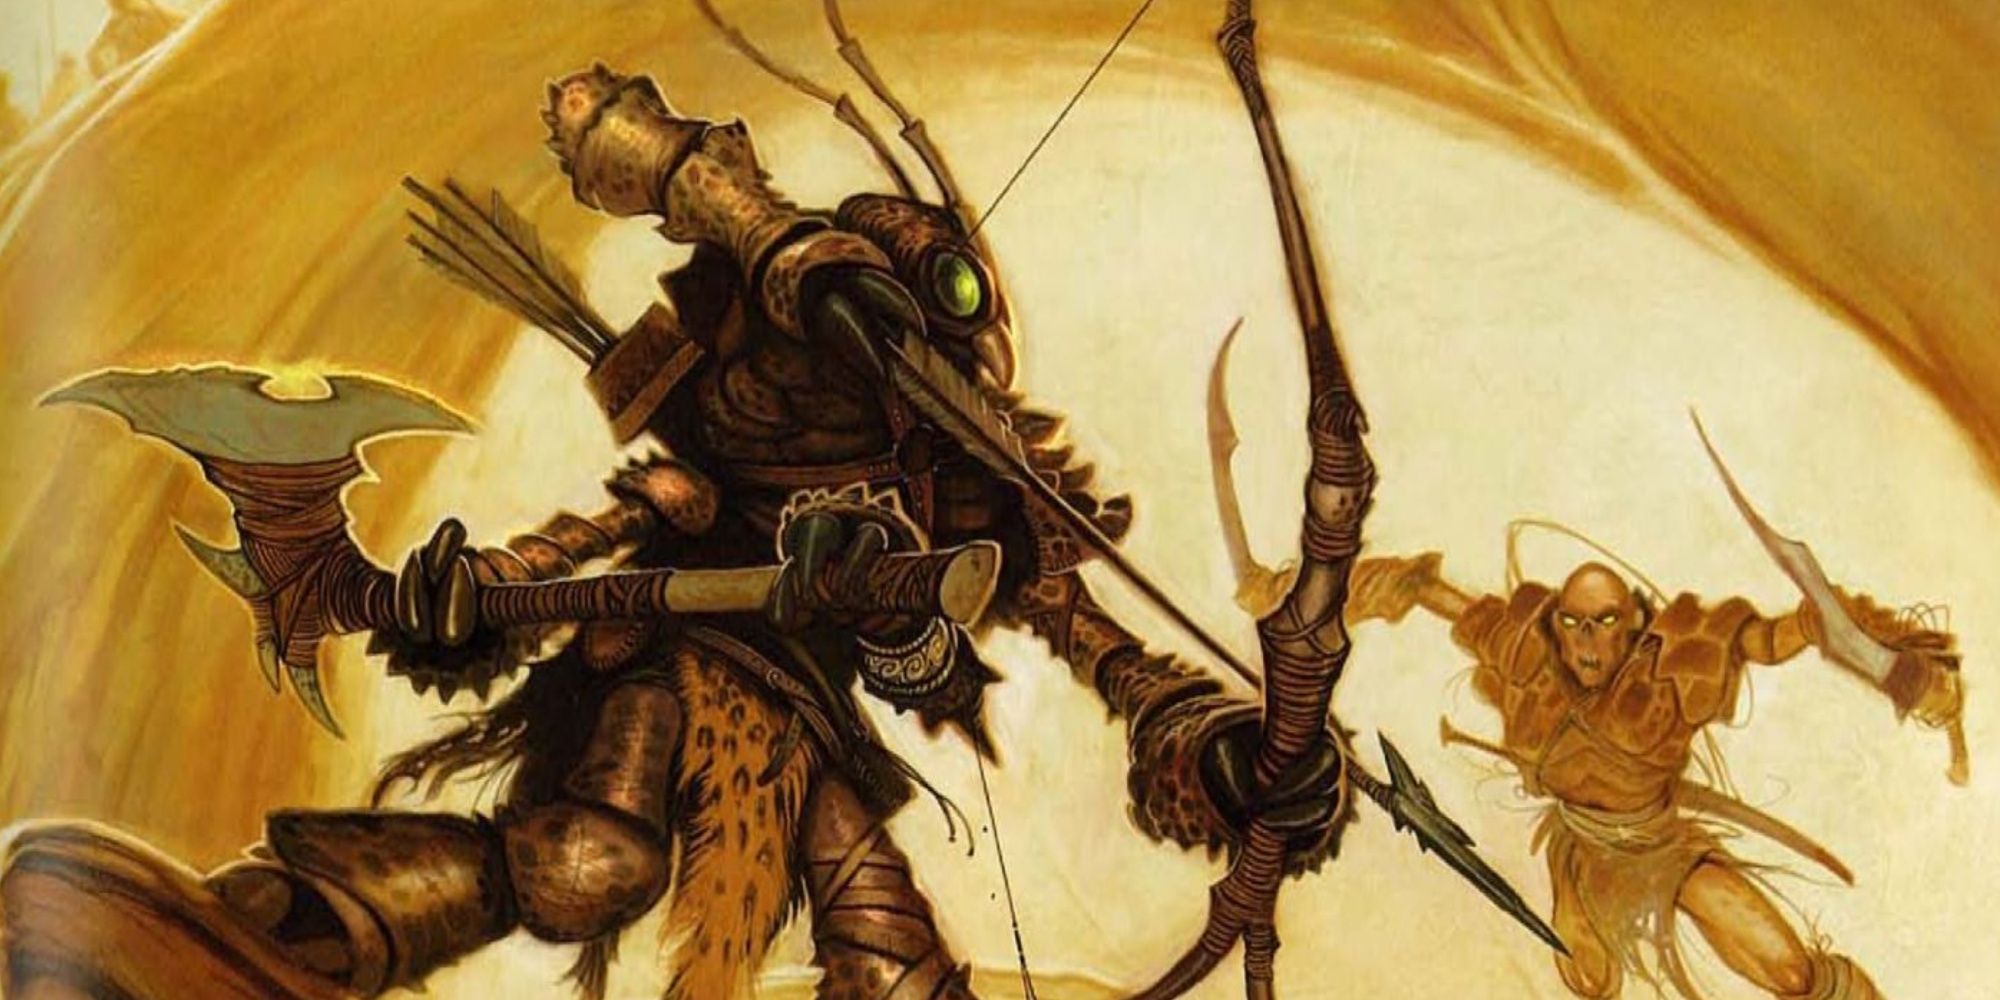 Dungeons & Dragons 4e thri-kreen warrior in the dark sun holding a bow and an axe